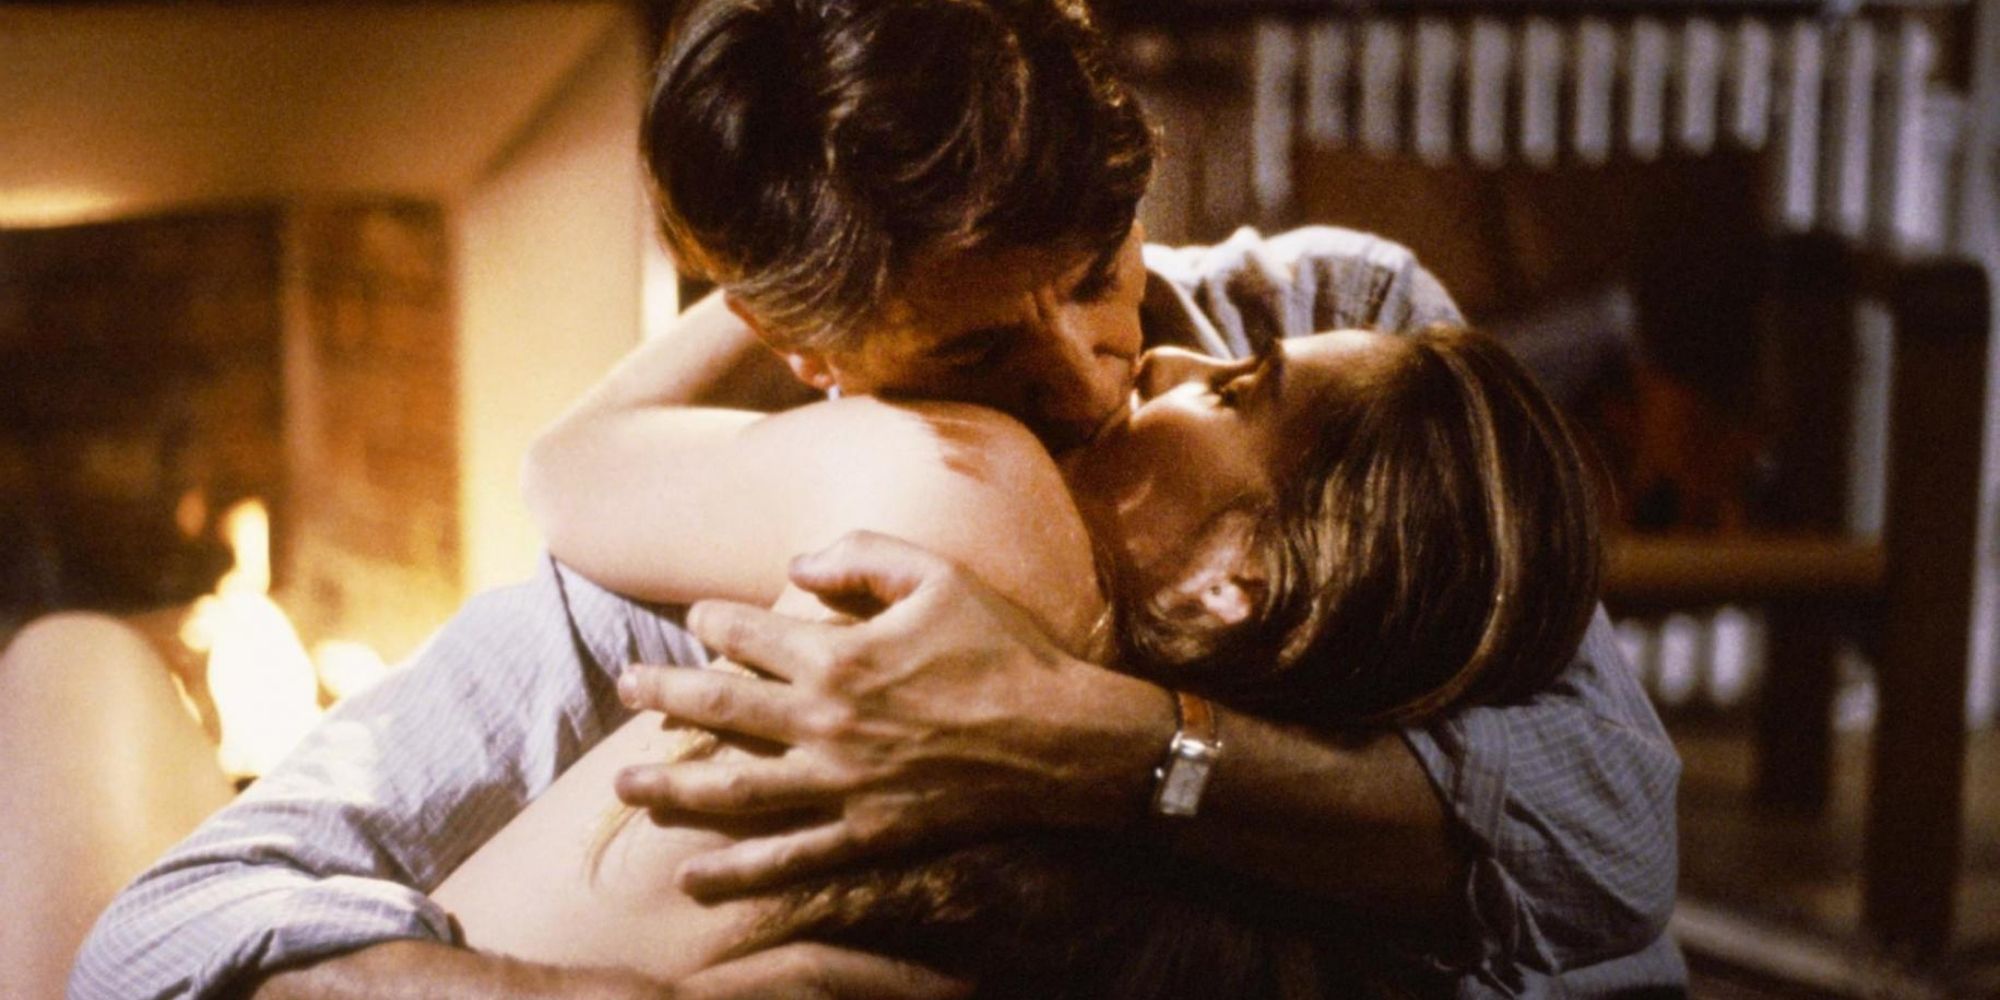 Peter Coyote and Emmanuelle Seigner as Oscar and Mimi kissing in Bitter Moon